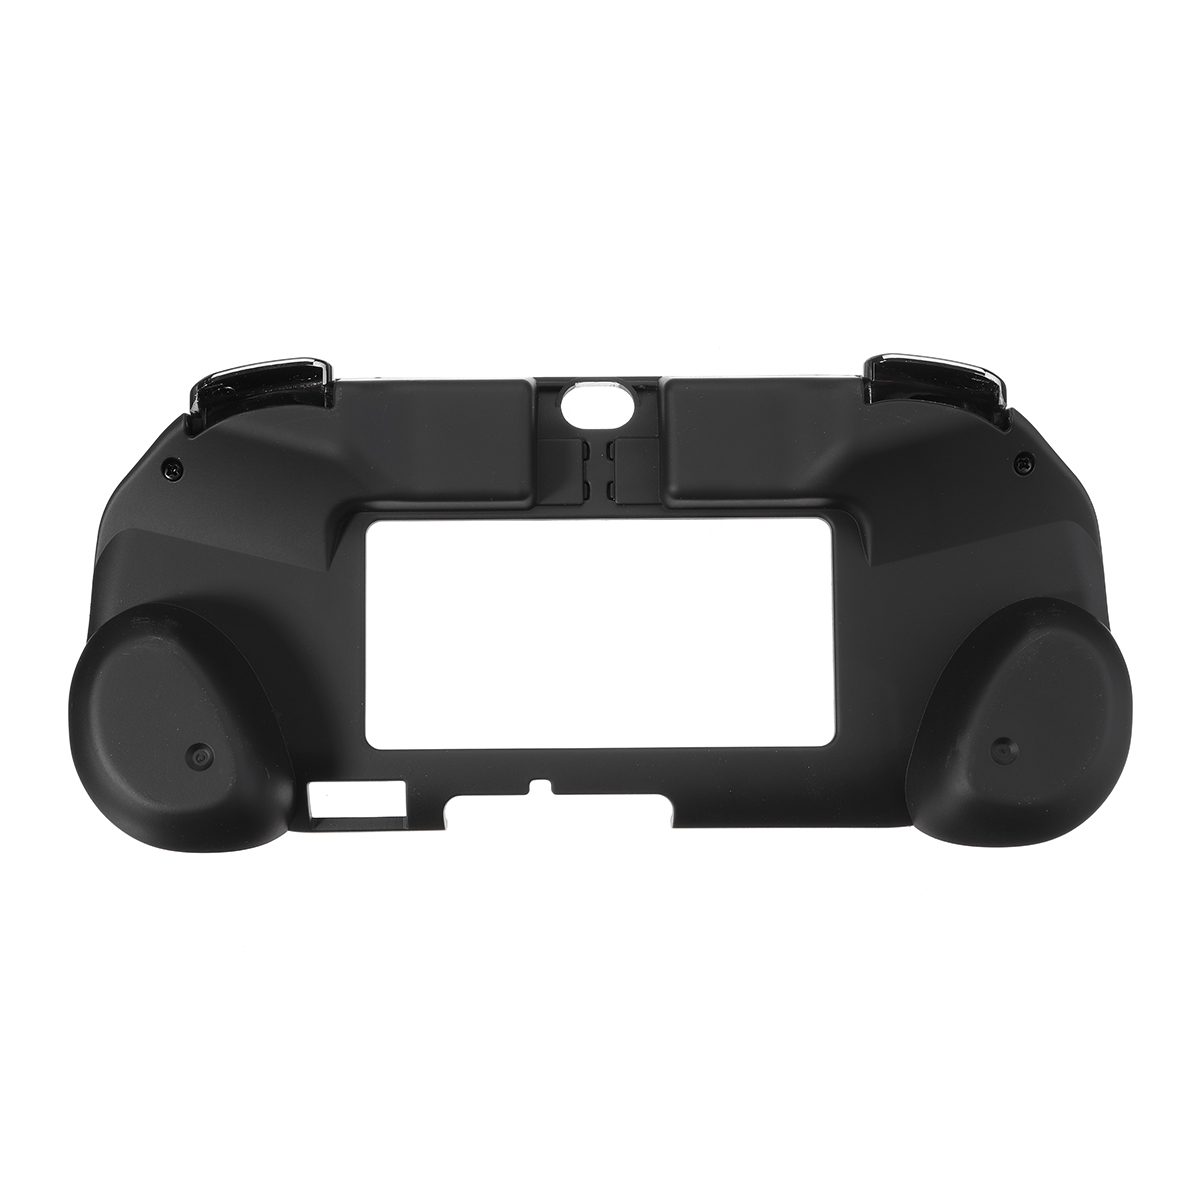 L2 R2 Trigger Grips Handle Shell Protective Case for Sony PlayStation PS Vita 2000 Game Console 3